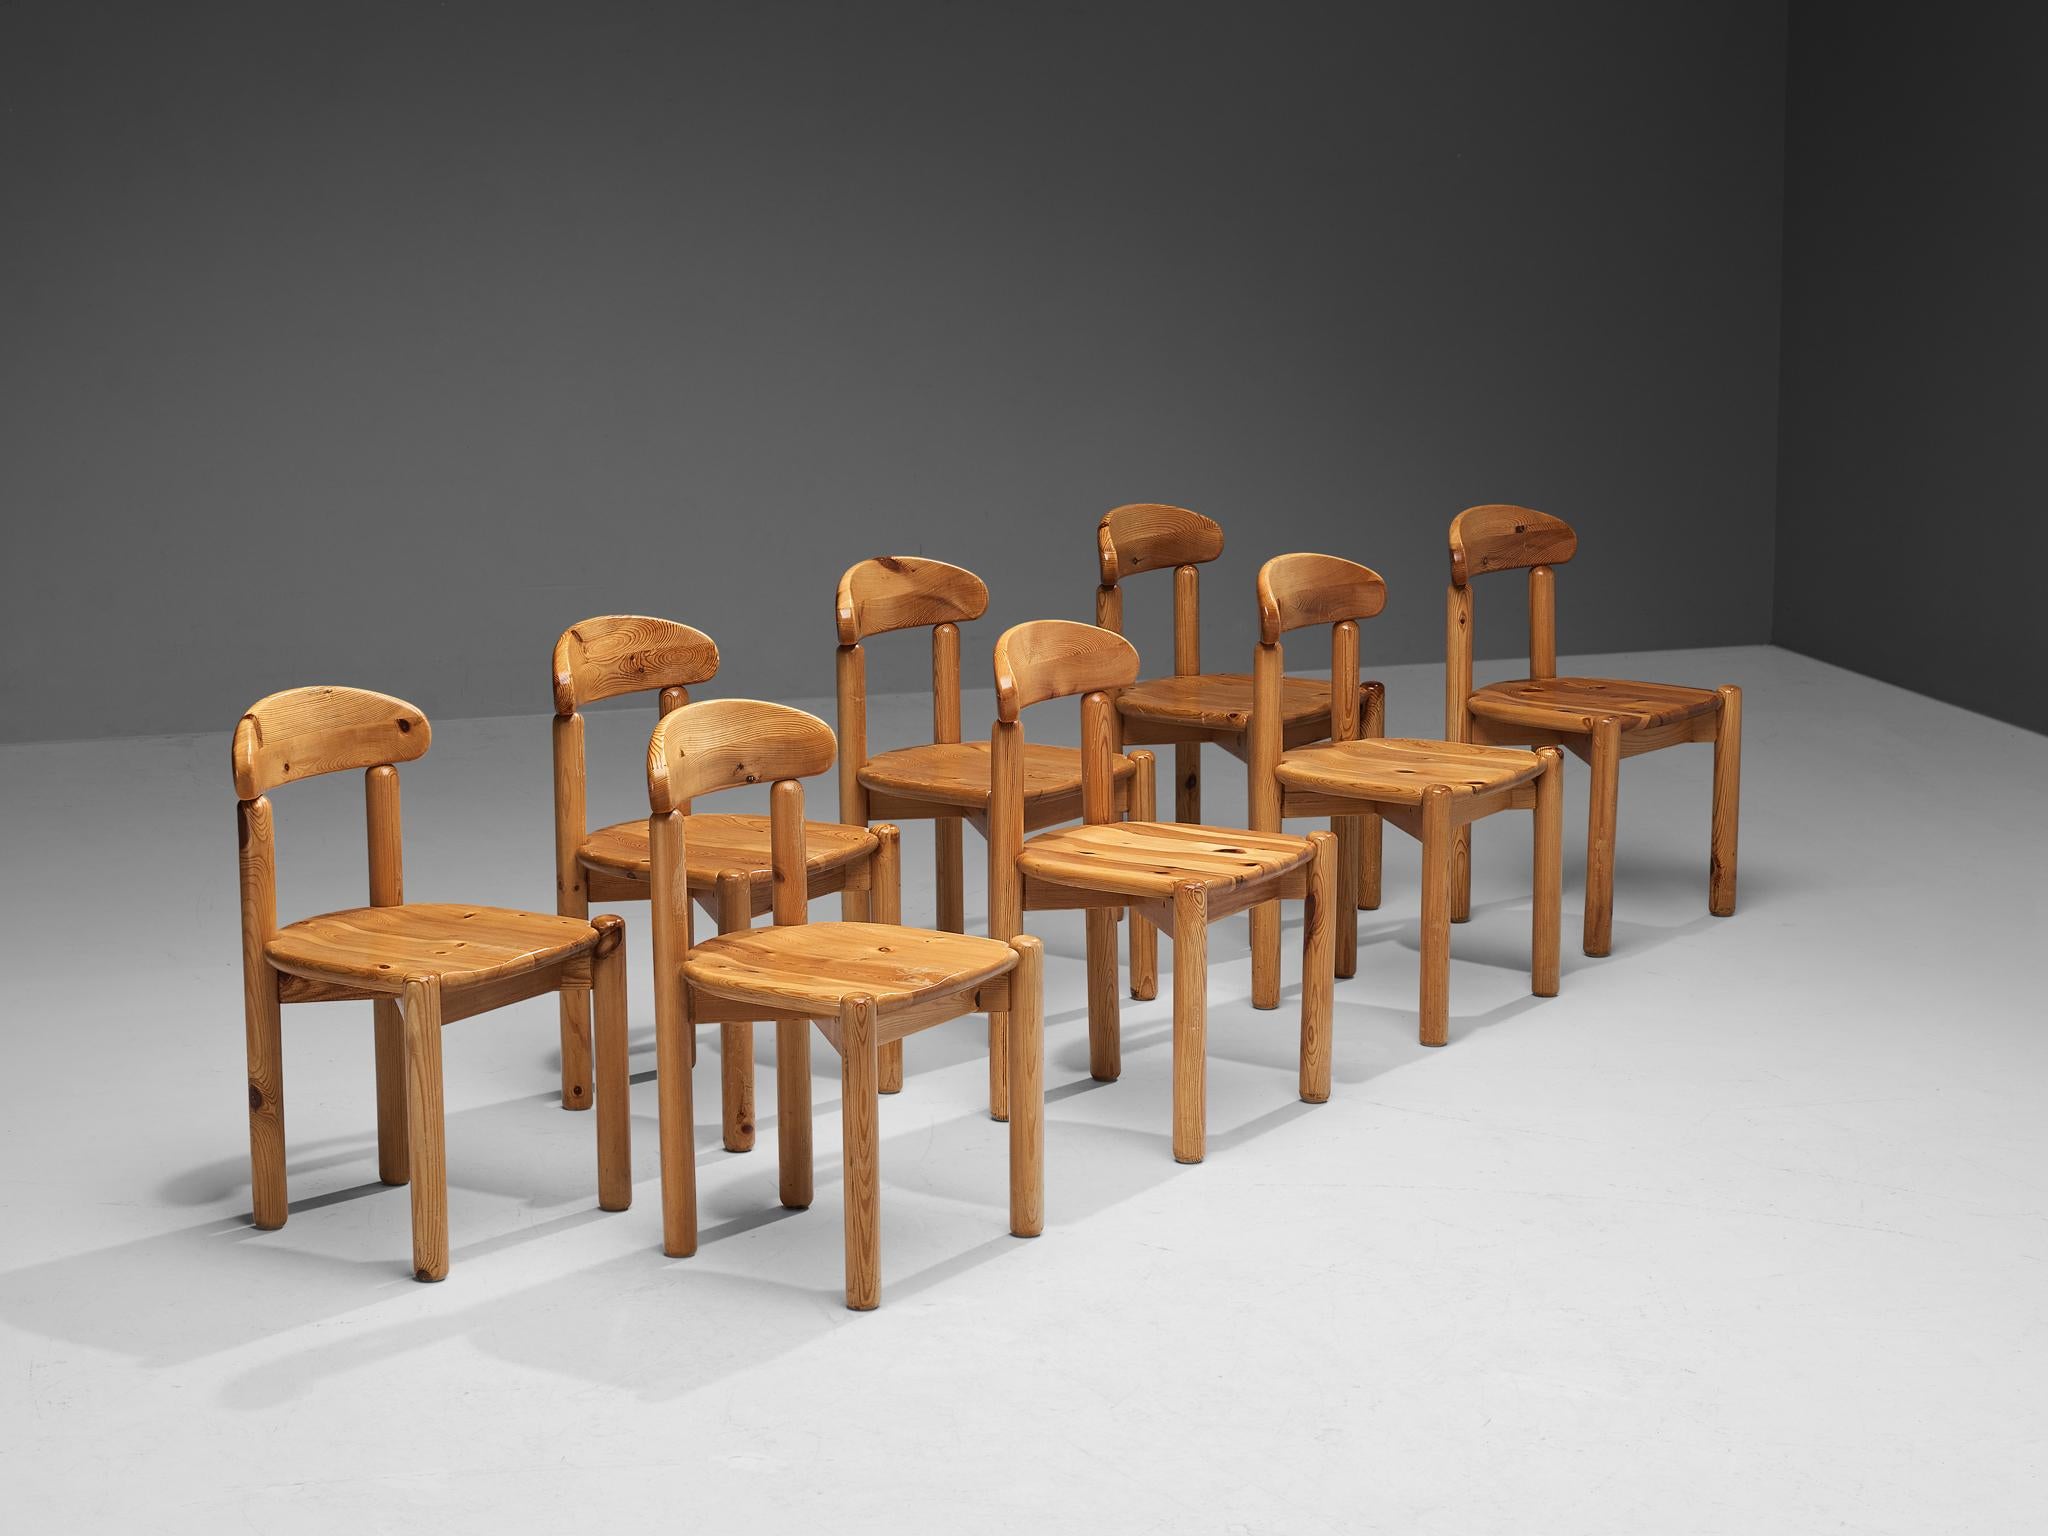 Rainer Daumiller for Hirtshals Sawmill, set of eight dining chairs, pine, Denmark, 1970s

This set of eight comfortable and natural dining chairs is designed by Rainer Daumiller in the 1970s. These chairs hold a very organic and easy appearance.